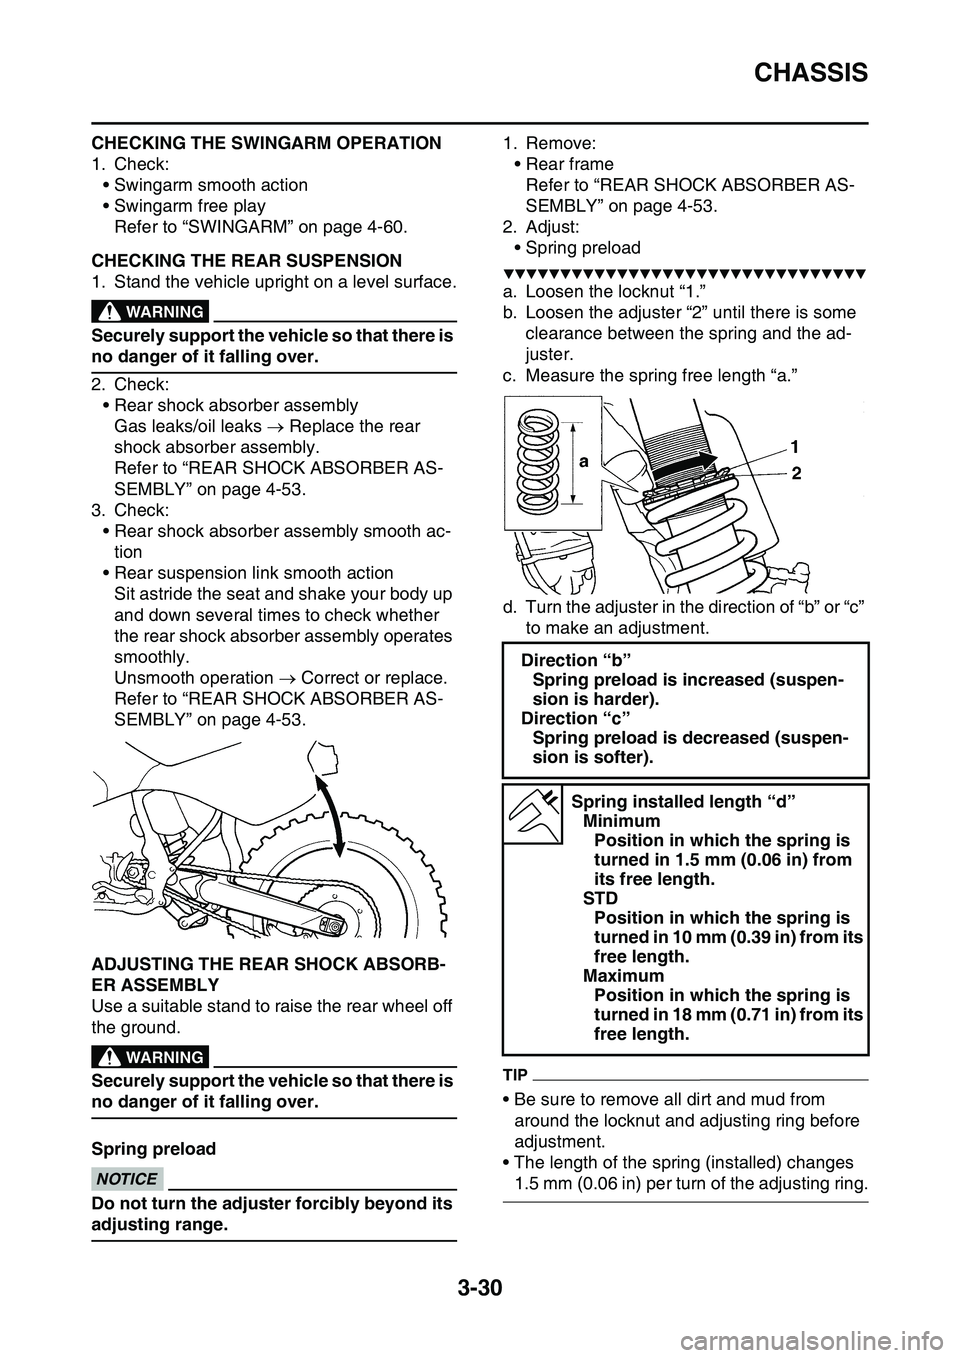 YAMAHA YZ450F 2014  Owners Manual CHASSIS
3-30
CHECKING THE SWINGARM OPERATION
1. Check:
• Swingarm smooth action
• Swingarm free play
Refer to “SWINGARM” on page 4-60.
EAS1SL1105CHECKING THE REAR SUSPENSION
1. Stand the vehic